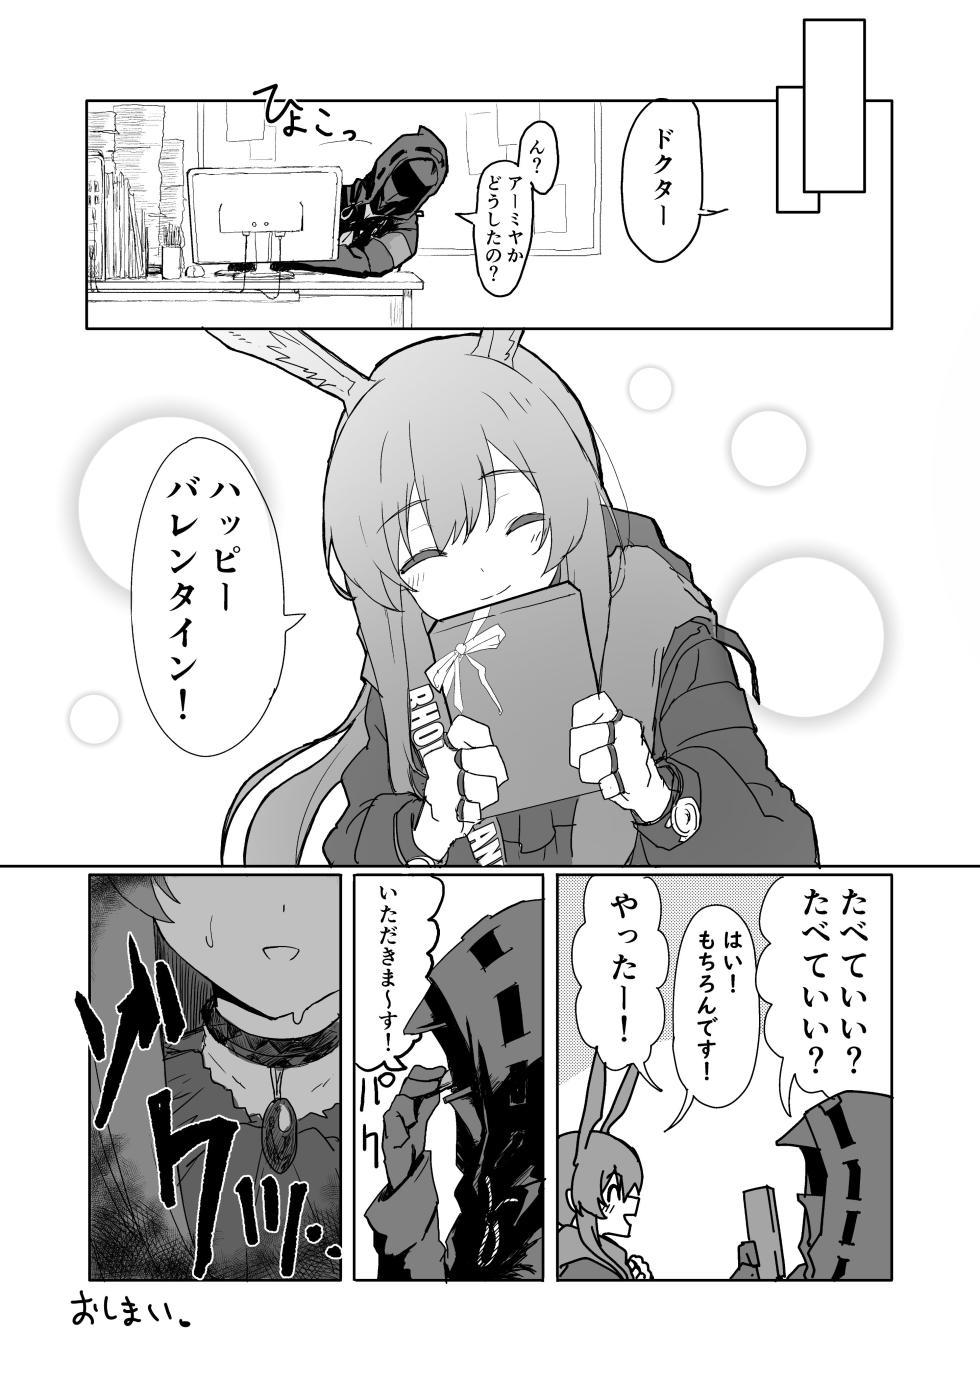 [Inukaki] Twitter collection (Arknights) [Japanese, Chinese] - Page 17